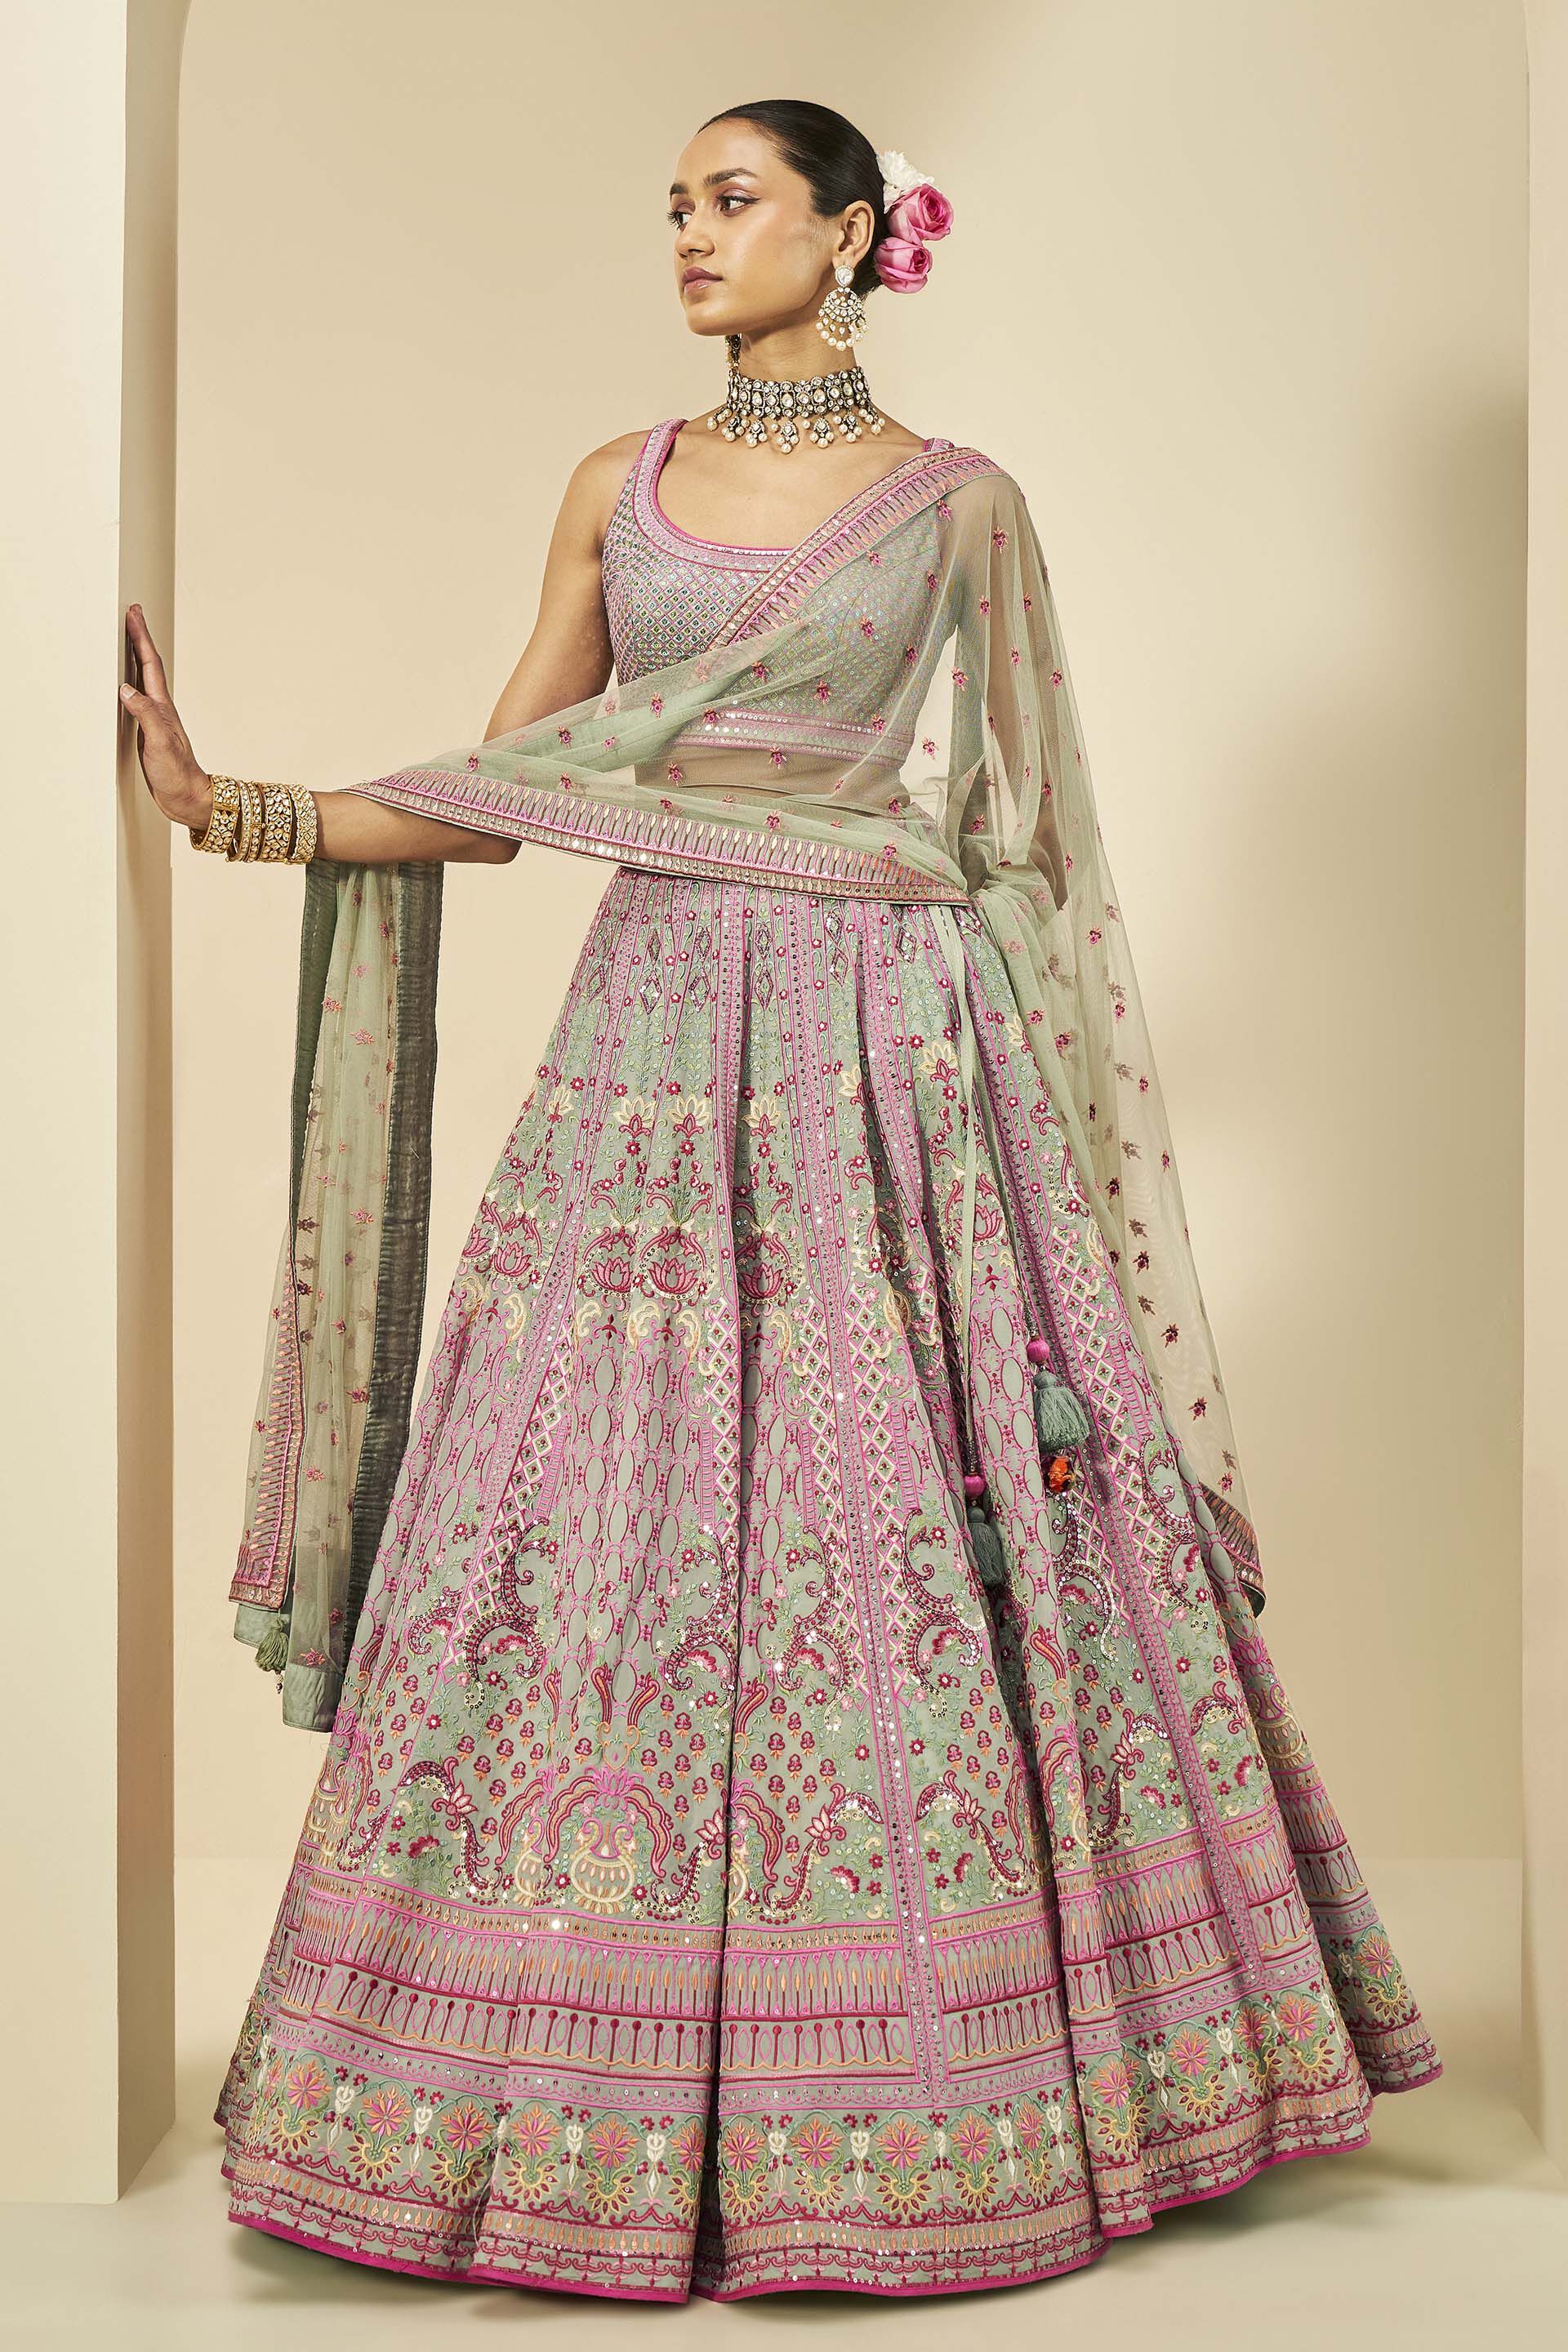 The Latest Lehenga Trends for Online Shoppers in the USA - Cbazaar Fashion  Blog